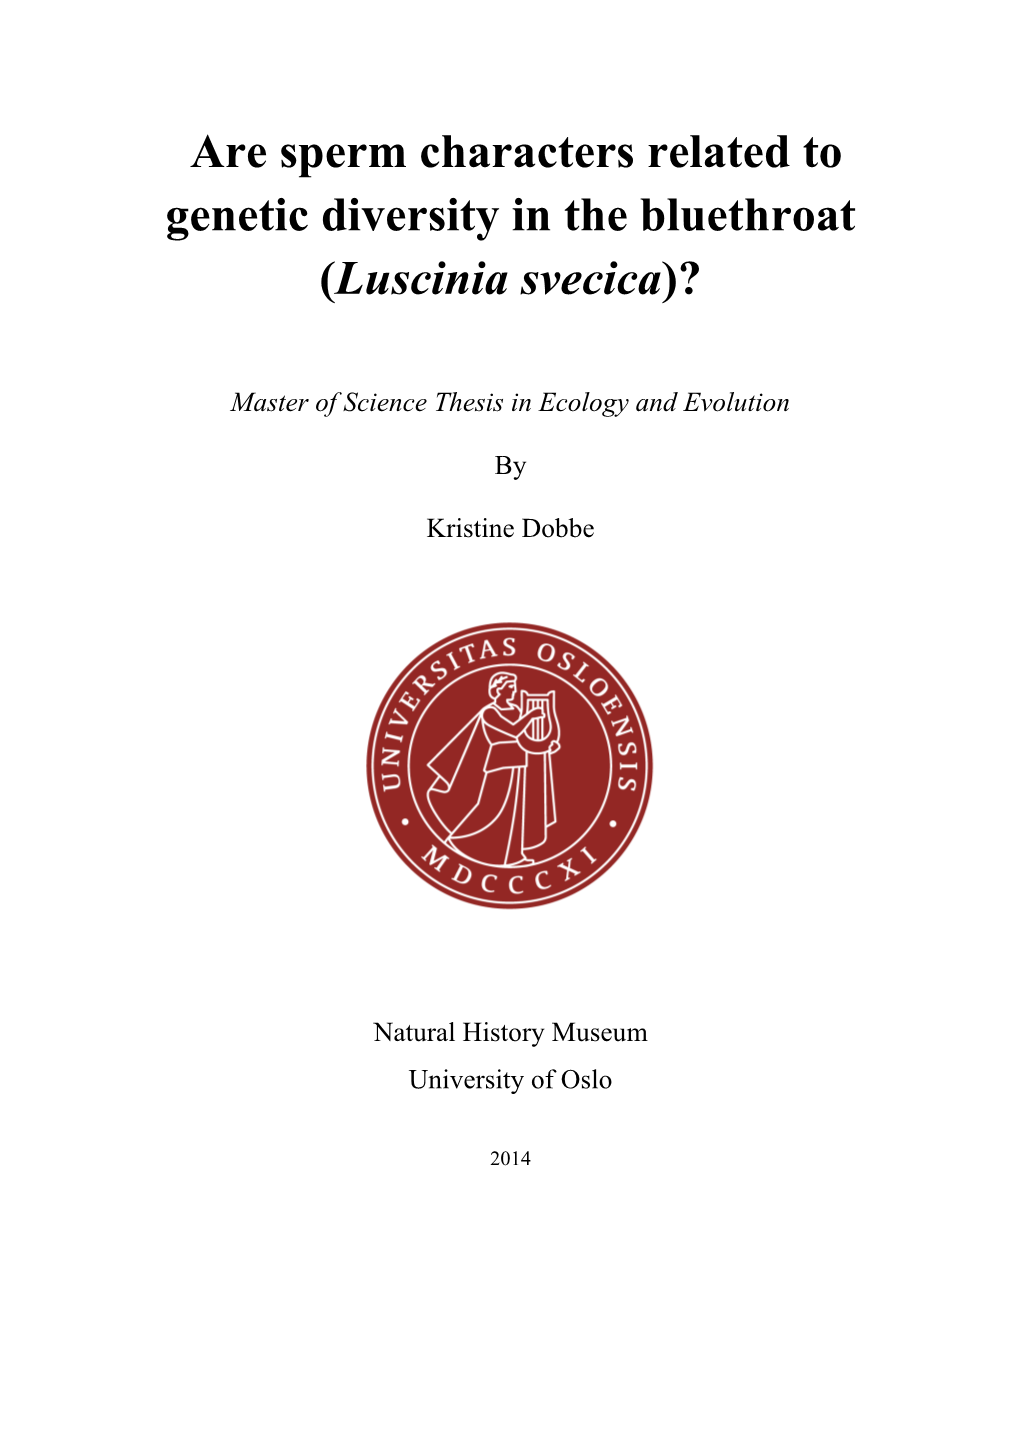 Are Sperm Characters Related to Genetic Diversity in the Bluethroat (Luscinia Svecica)?